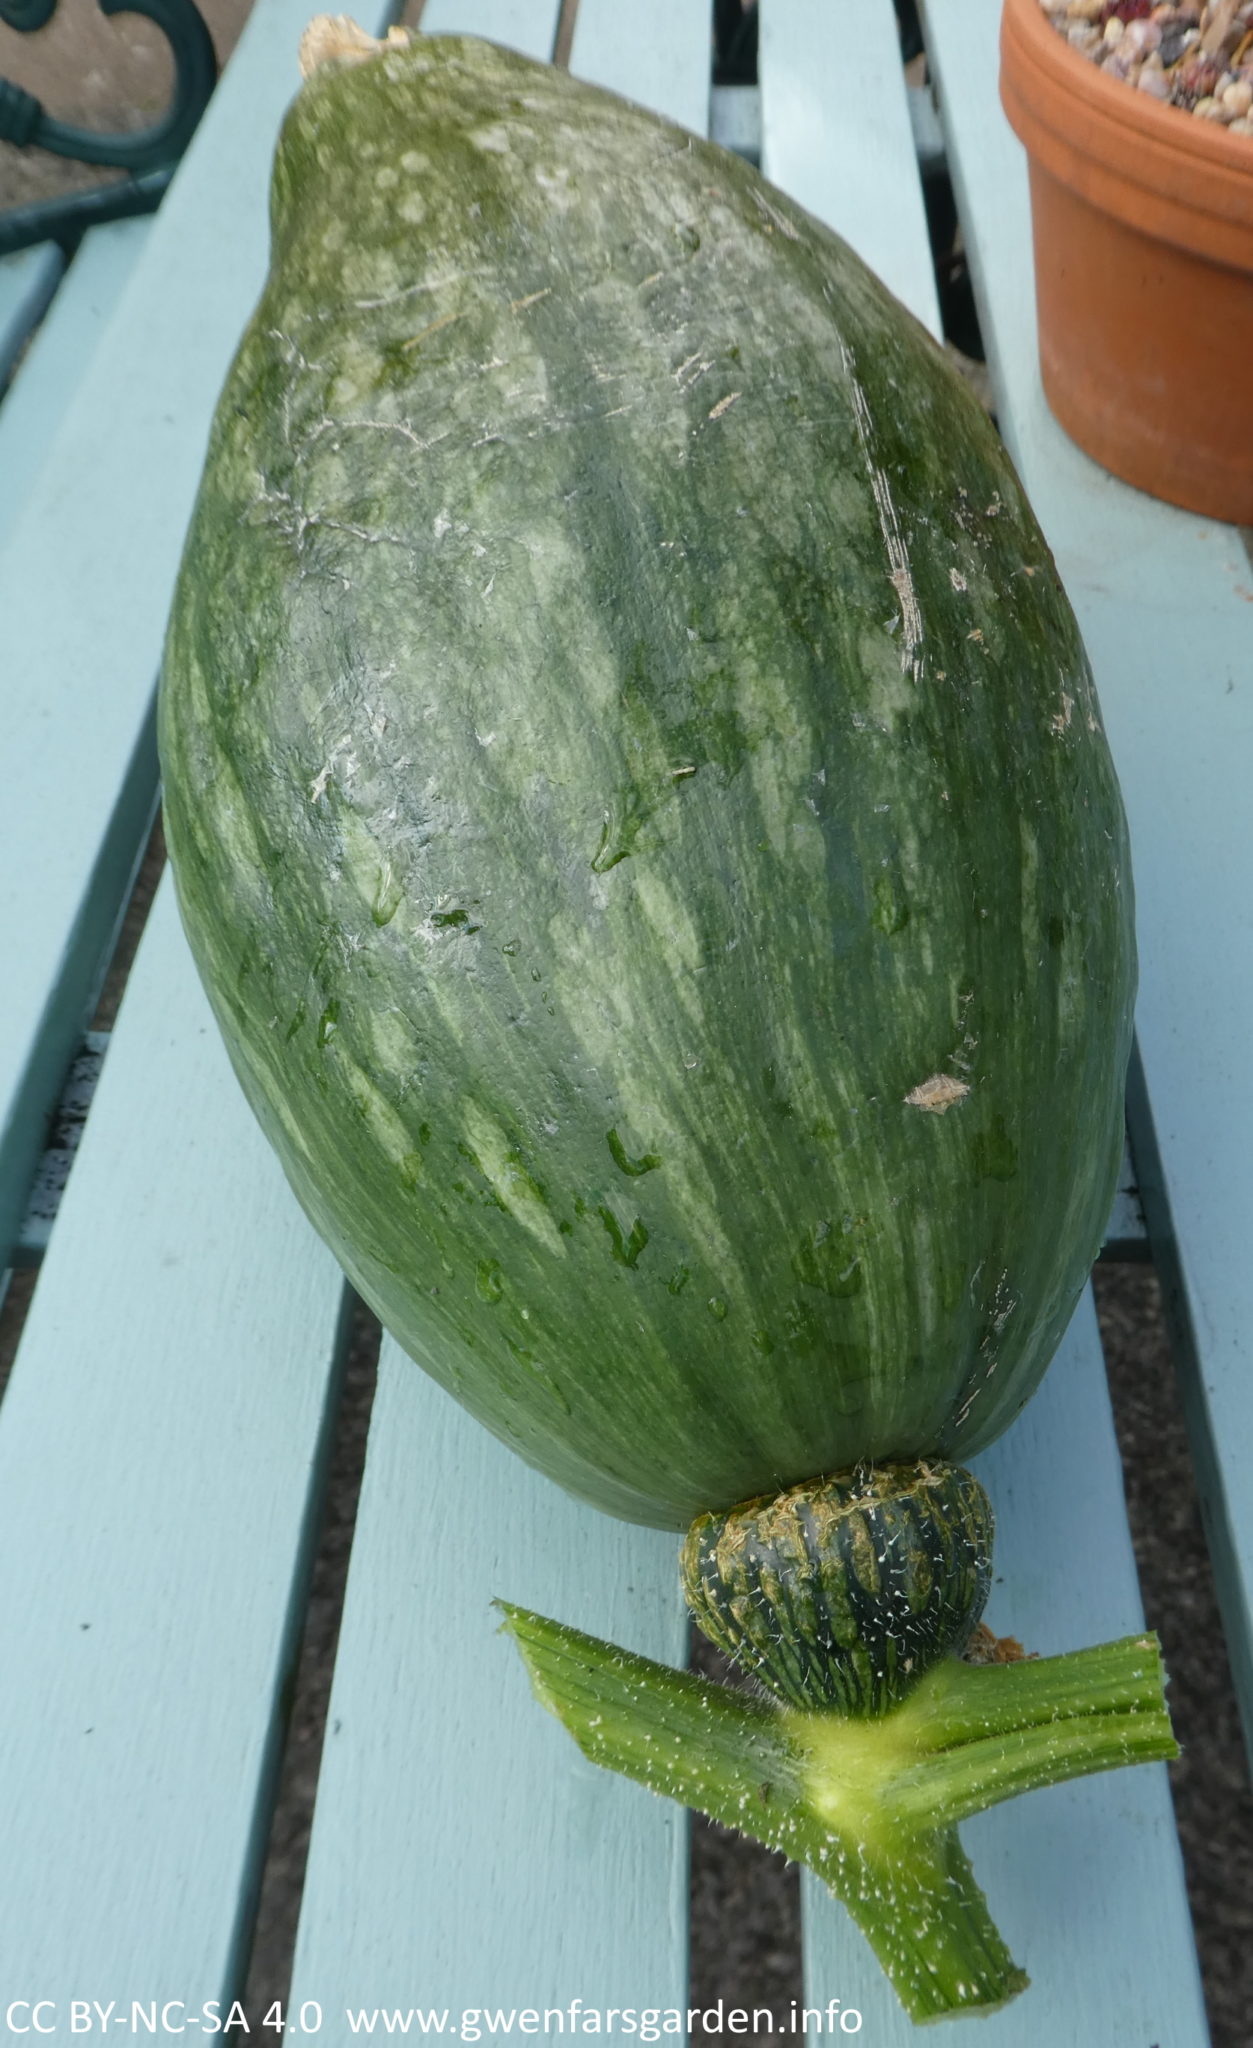 The largest pumpkin sitting on a blue-green table.